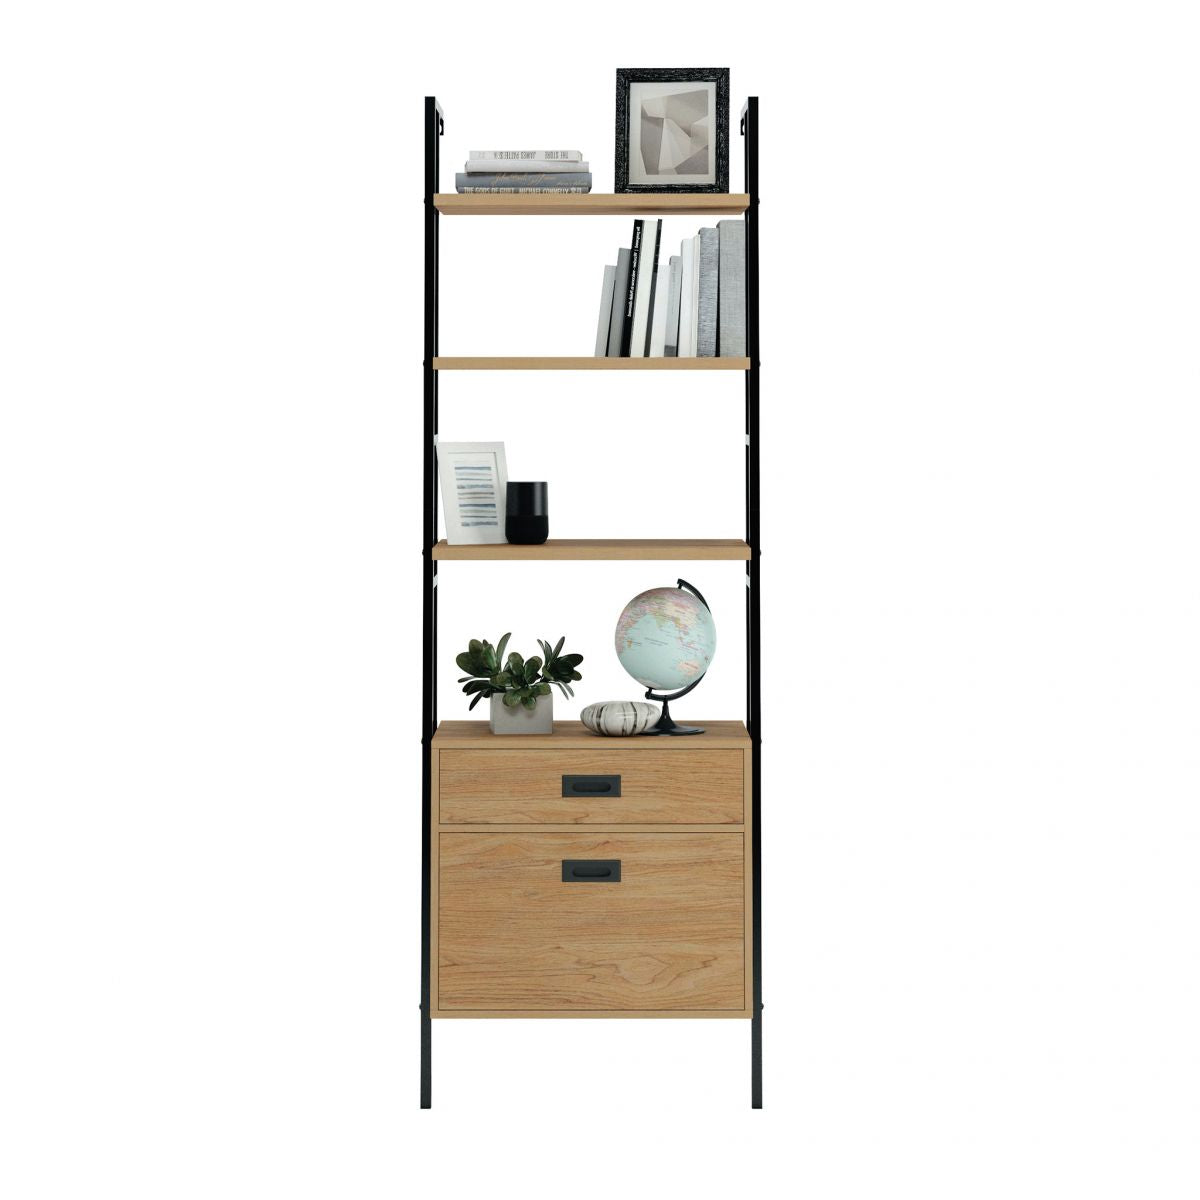 HYTHE WALL MOUNTED 4 SHELF BOOKCASE WITH DRAWERS CasaFenix